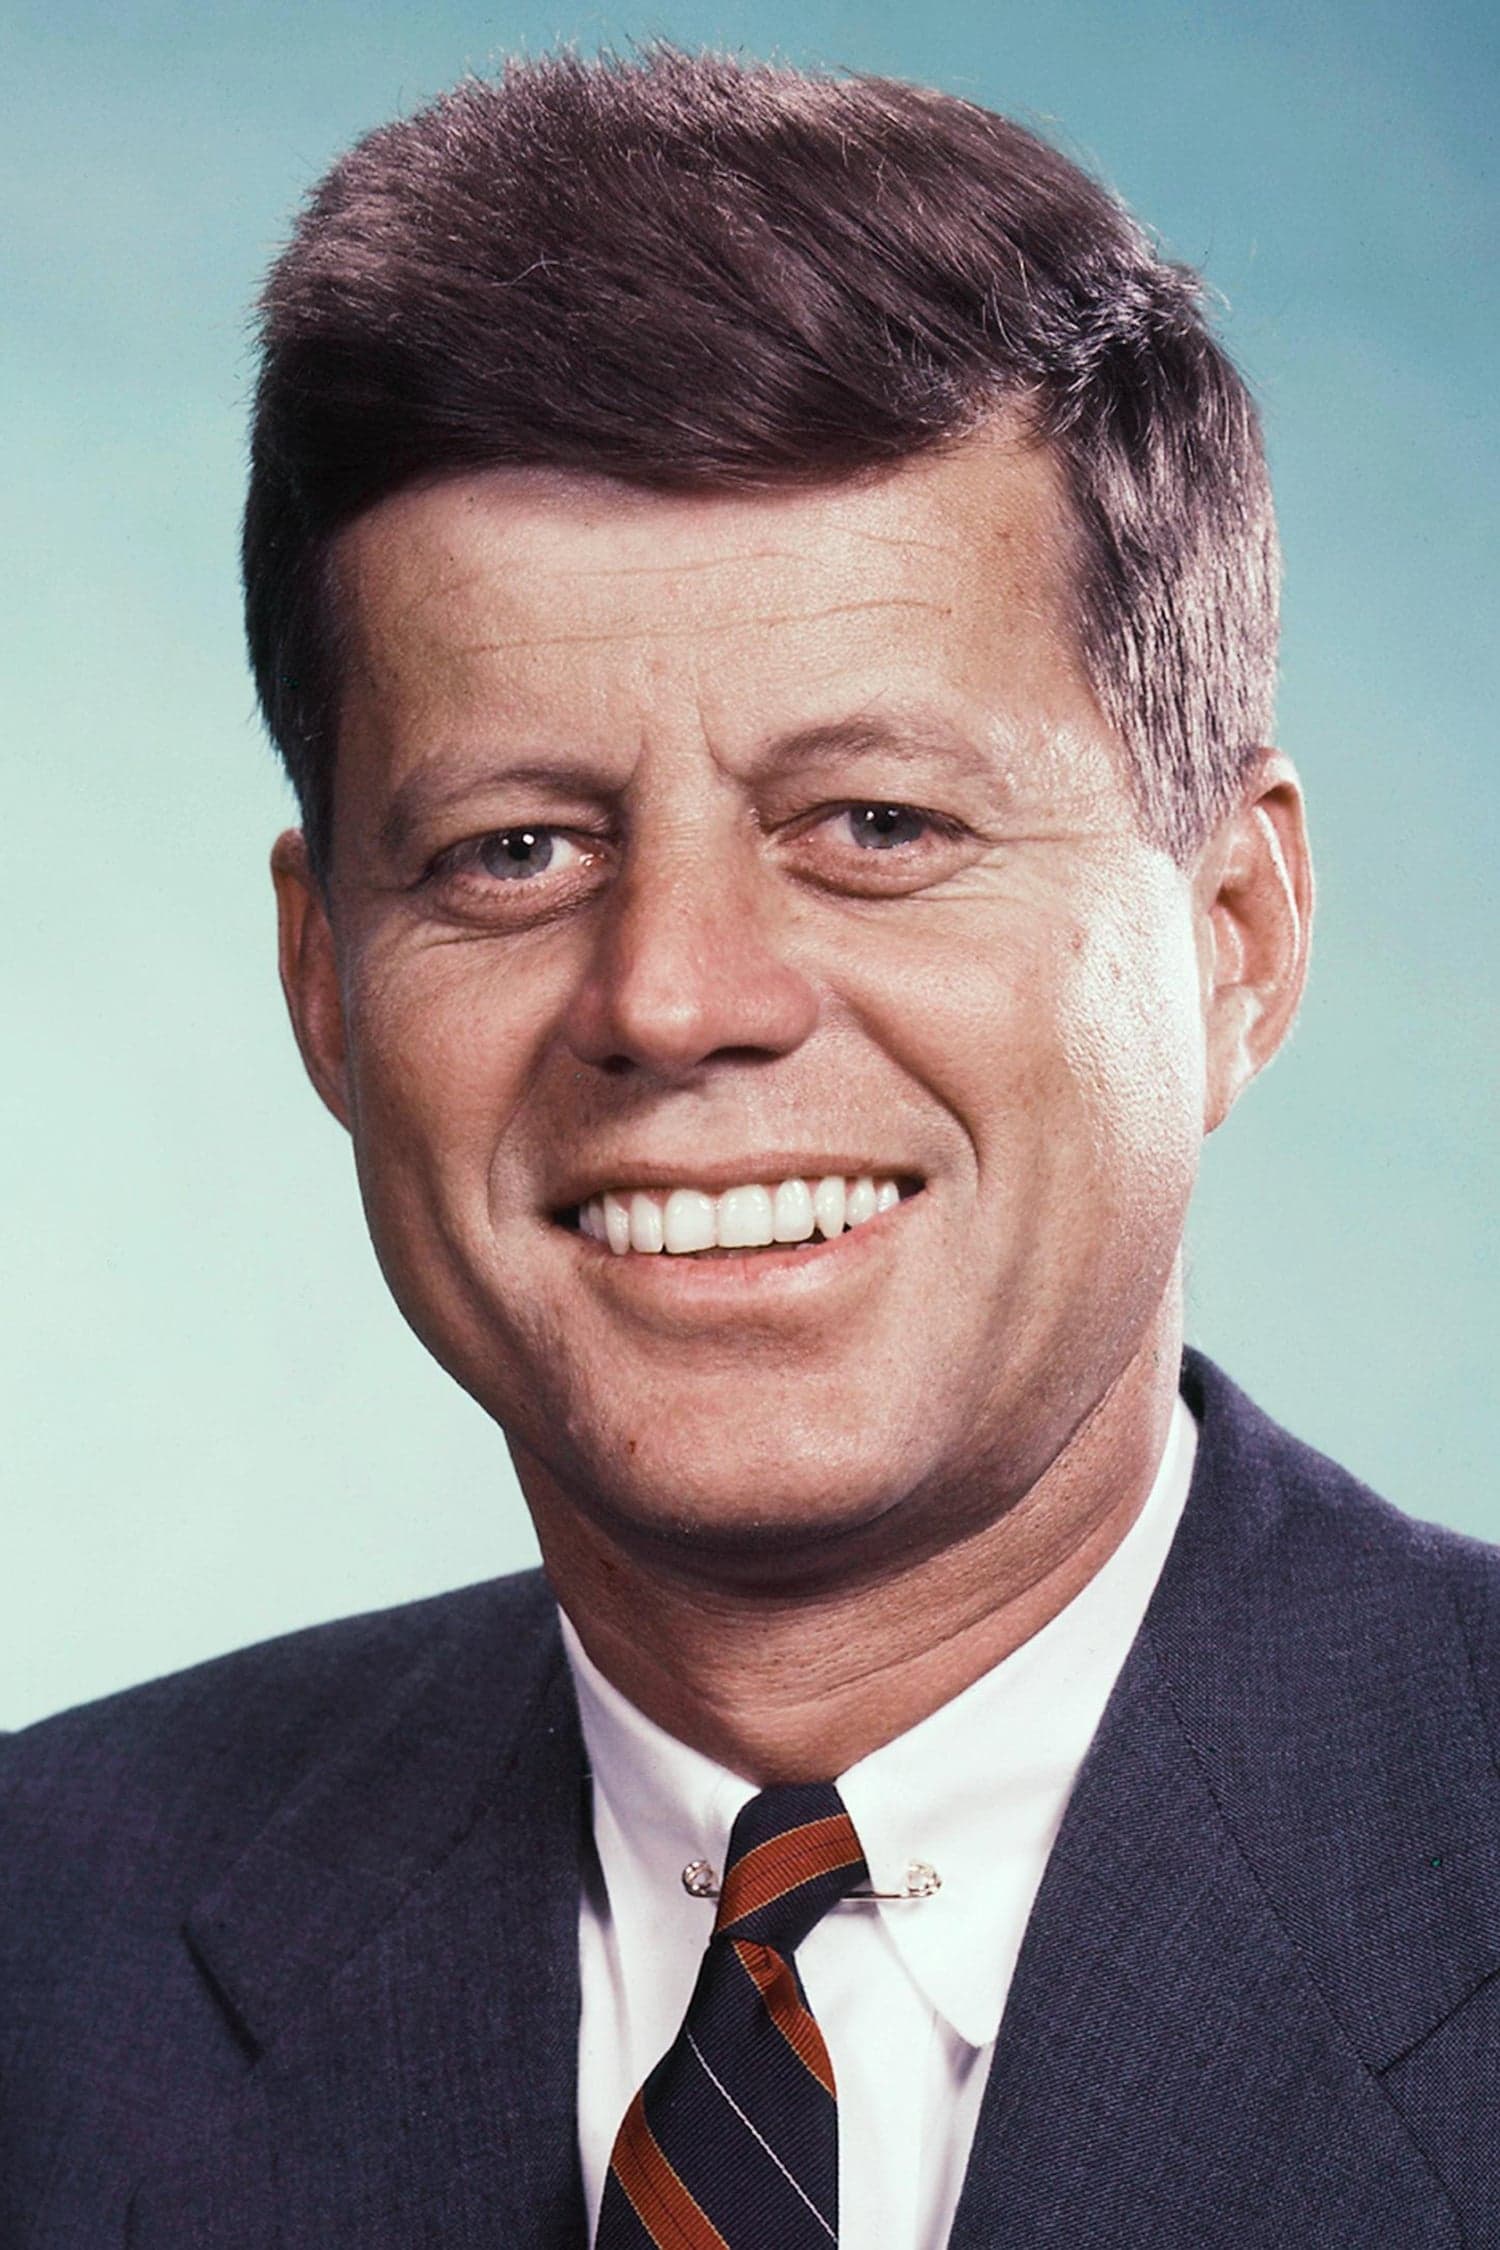 John F. Kennedy | Self (archive footage) (uncredited)